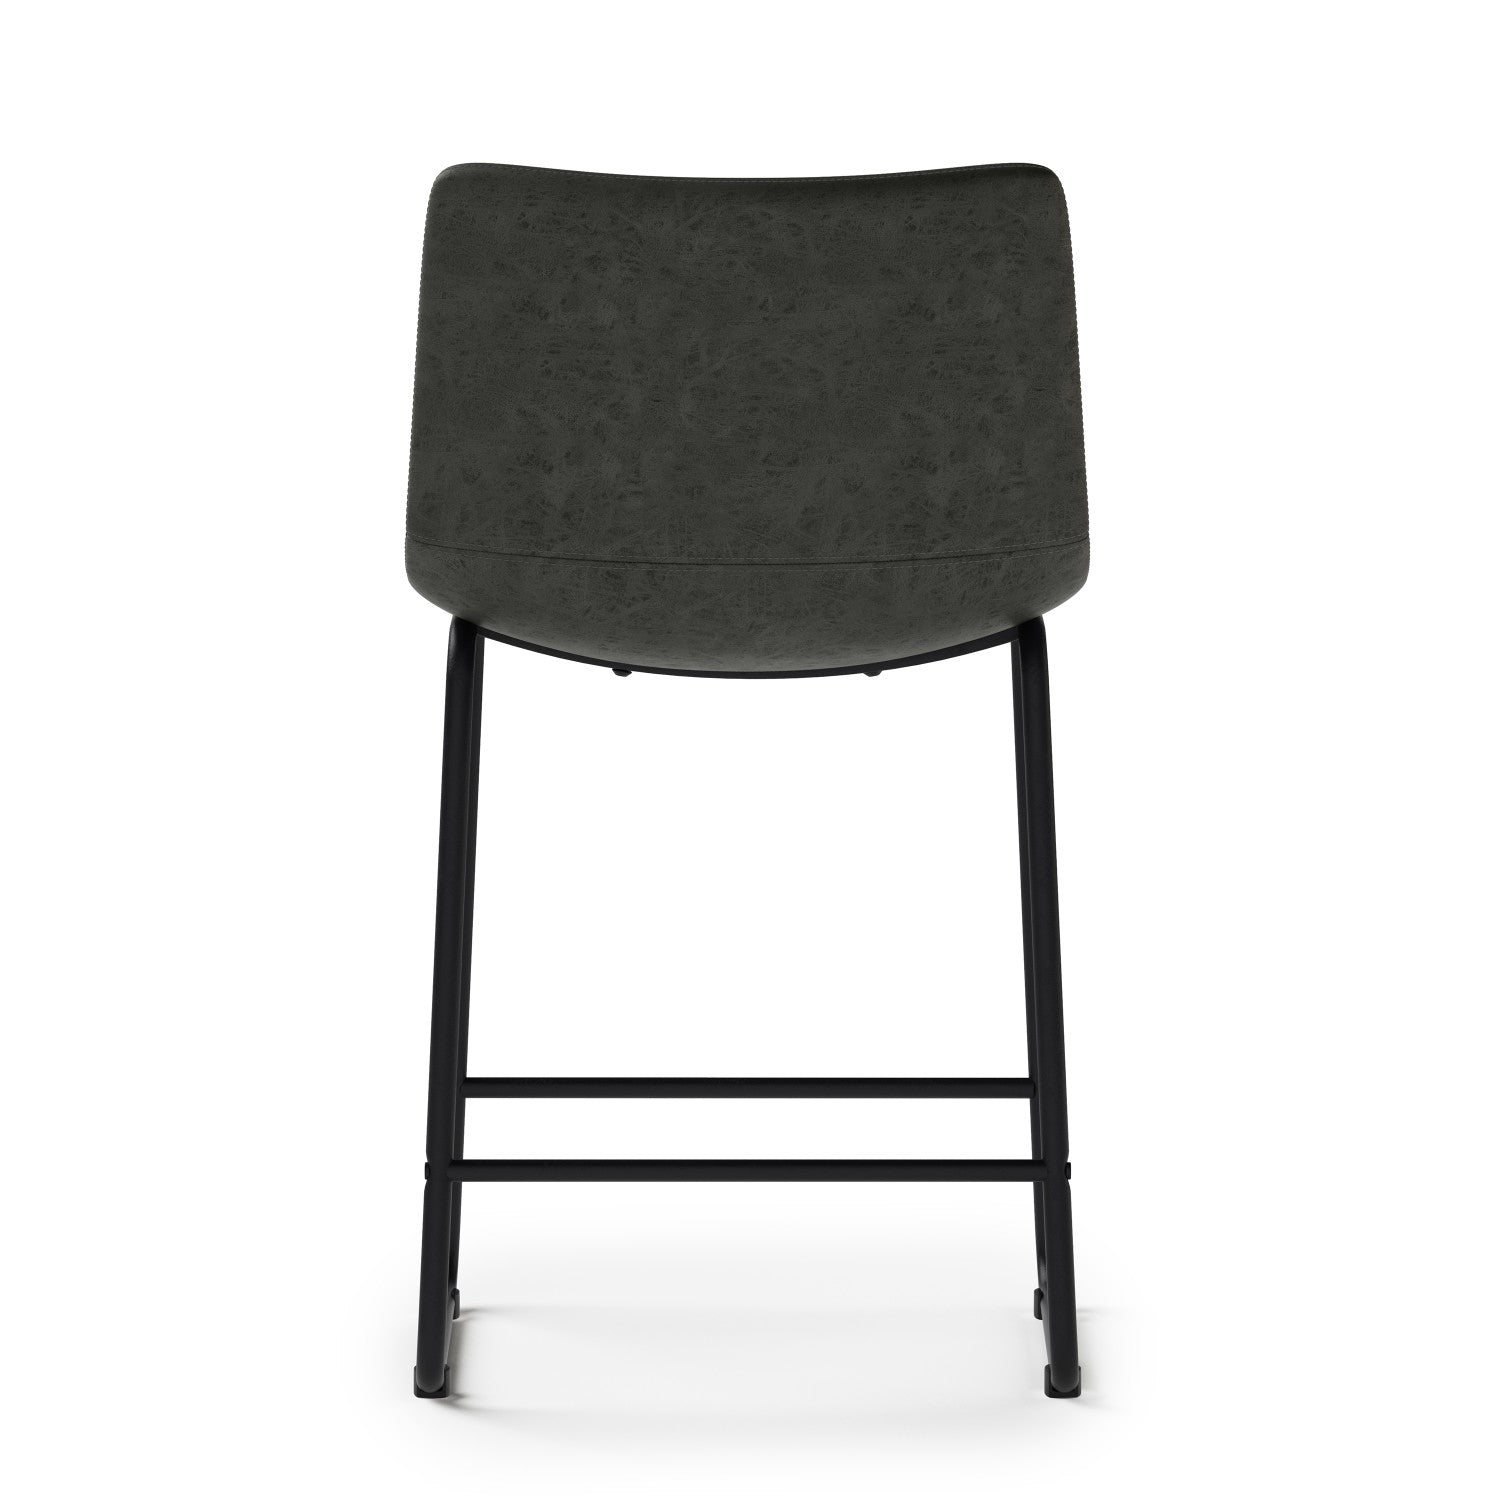 Distressed Charcoal Grey Distressed Vegan Leather | Warner Counter Height Stool (Set of 2)